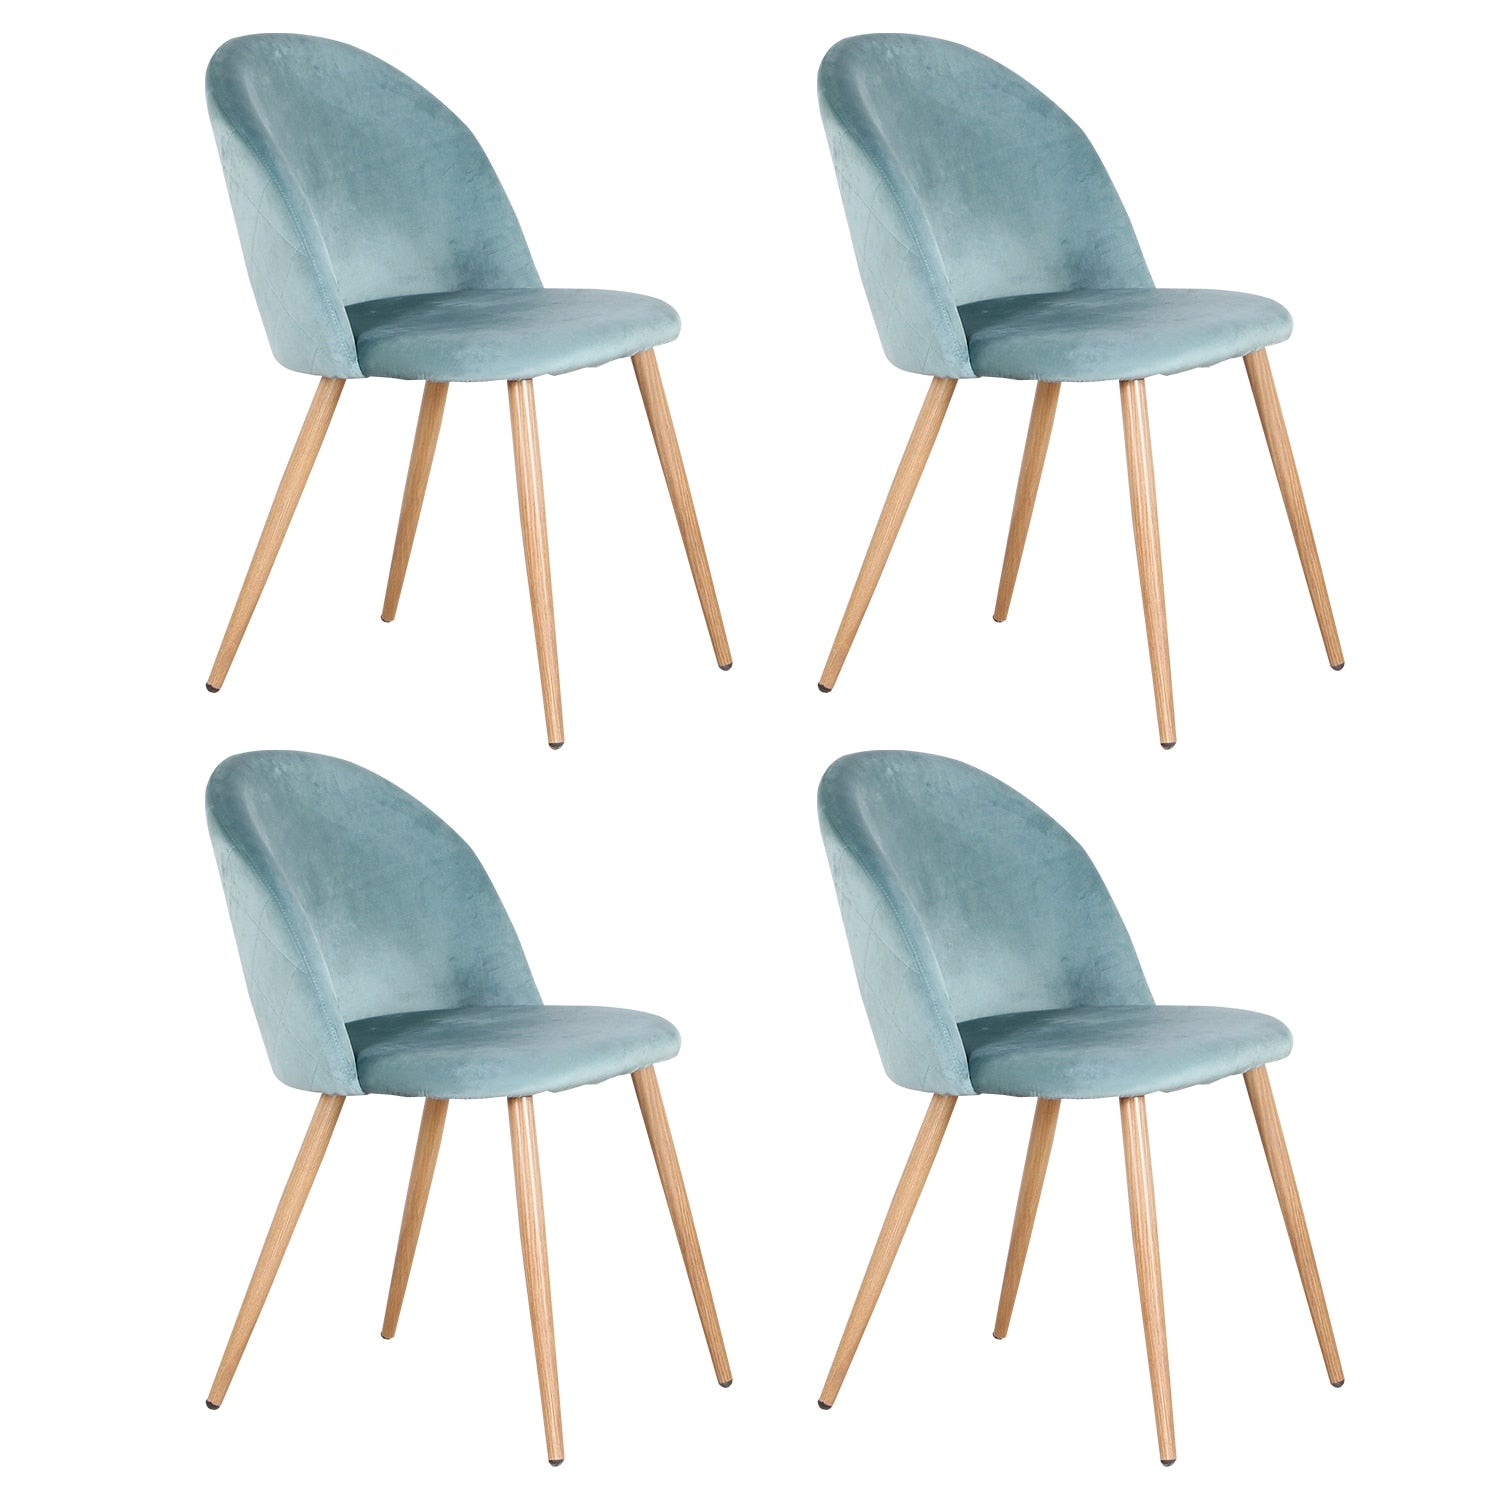 Set of 4 Soft Velvet Dining Chairs with Metal Feet | Modern Style for Home and Dining Room Furniture